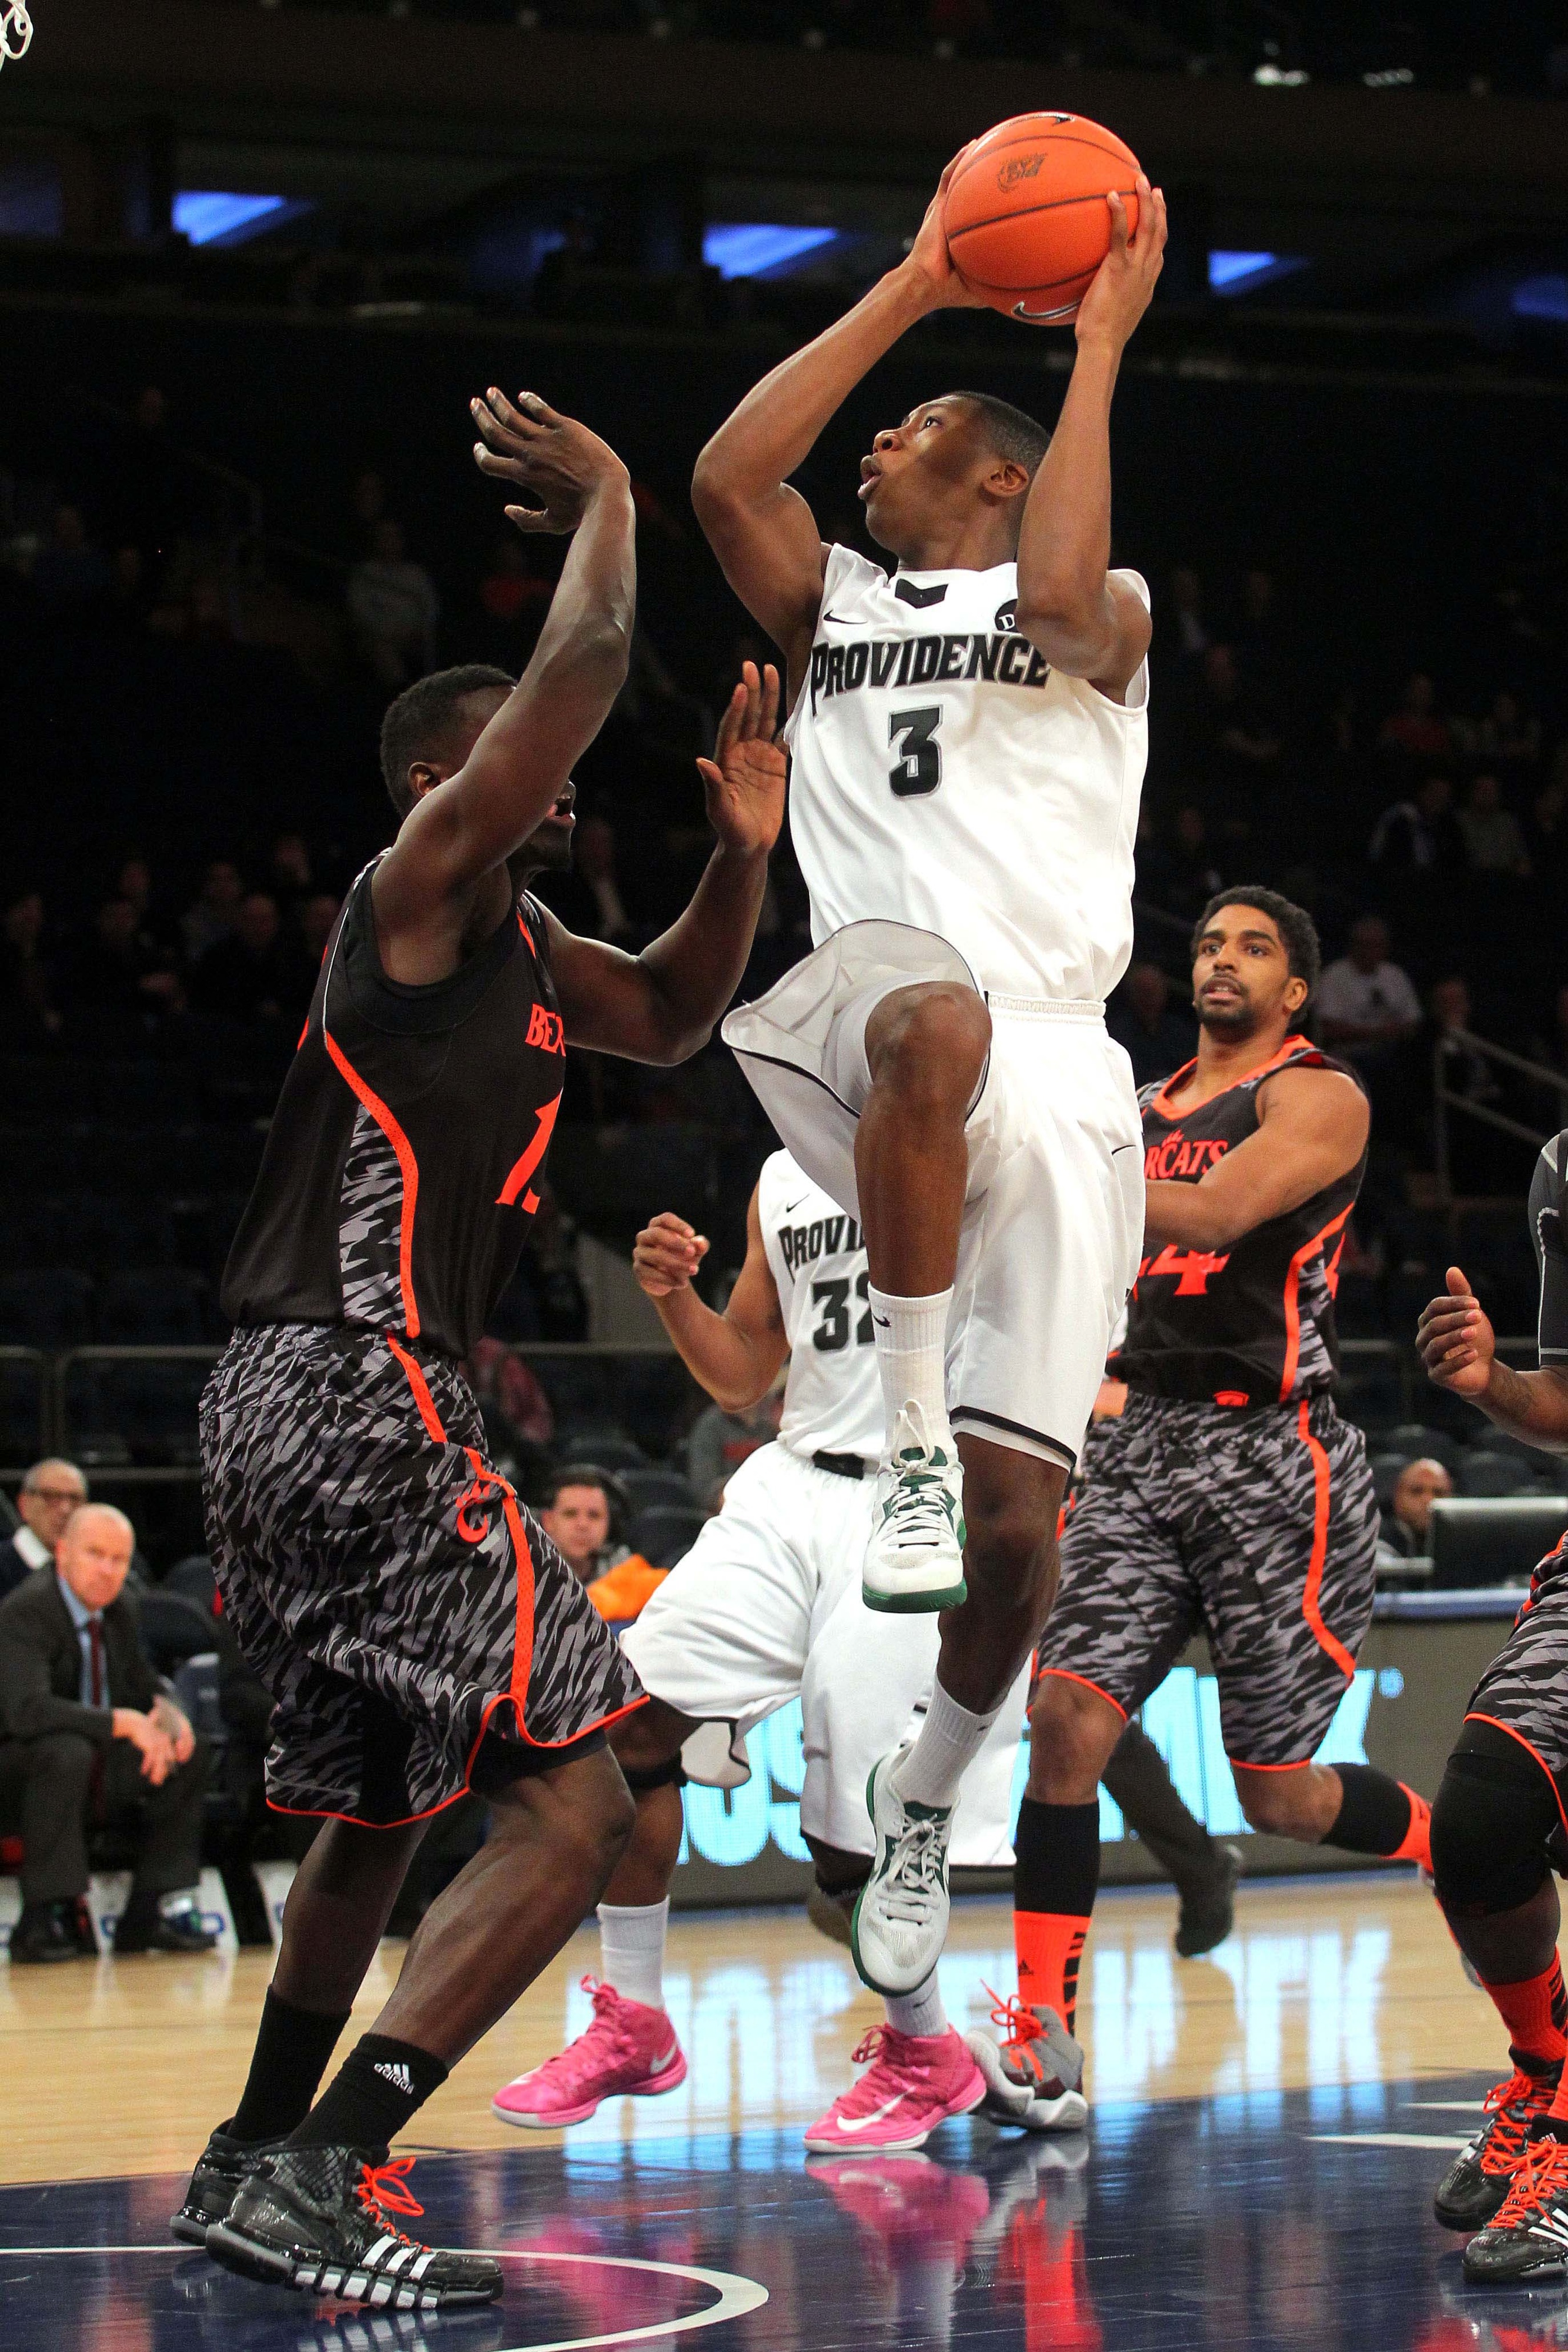 Kris Dunn will need to eat up minutes at point guard like Bryce Cotton did last season.